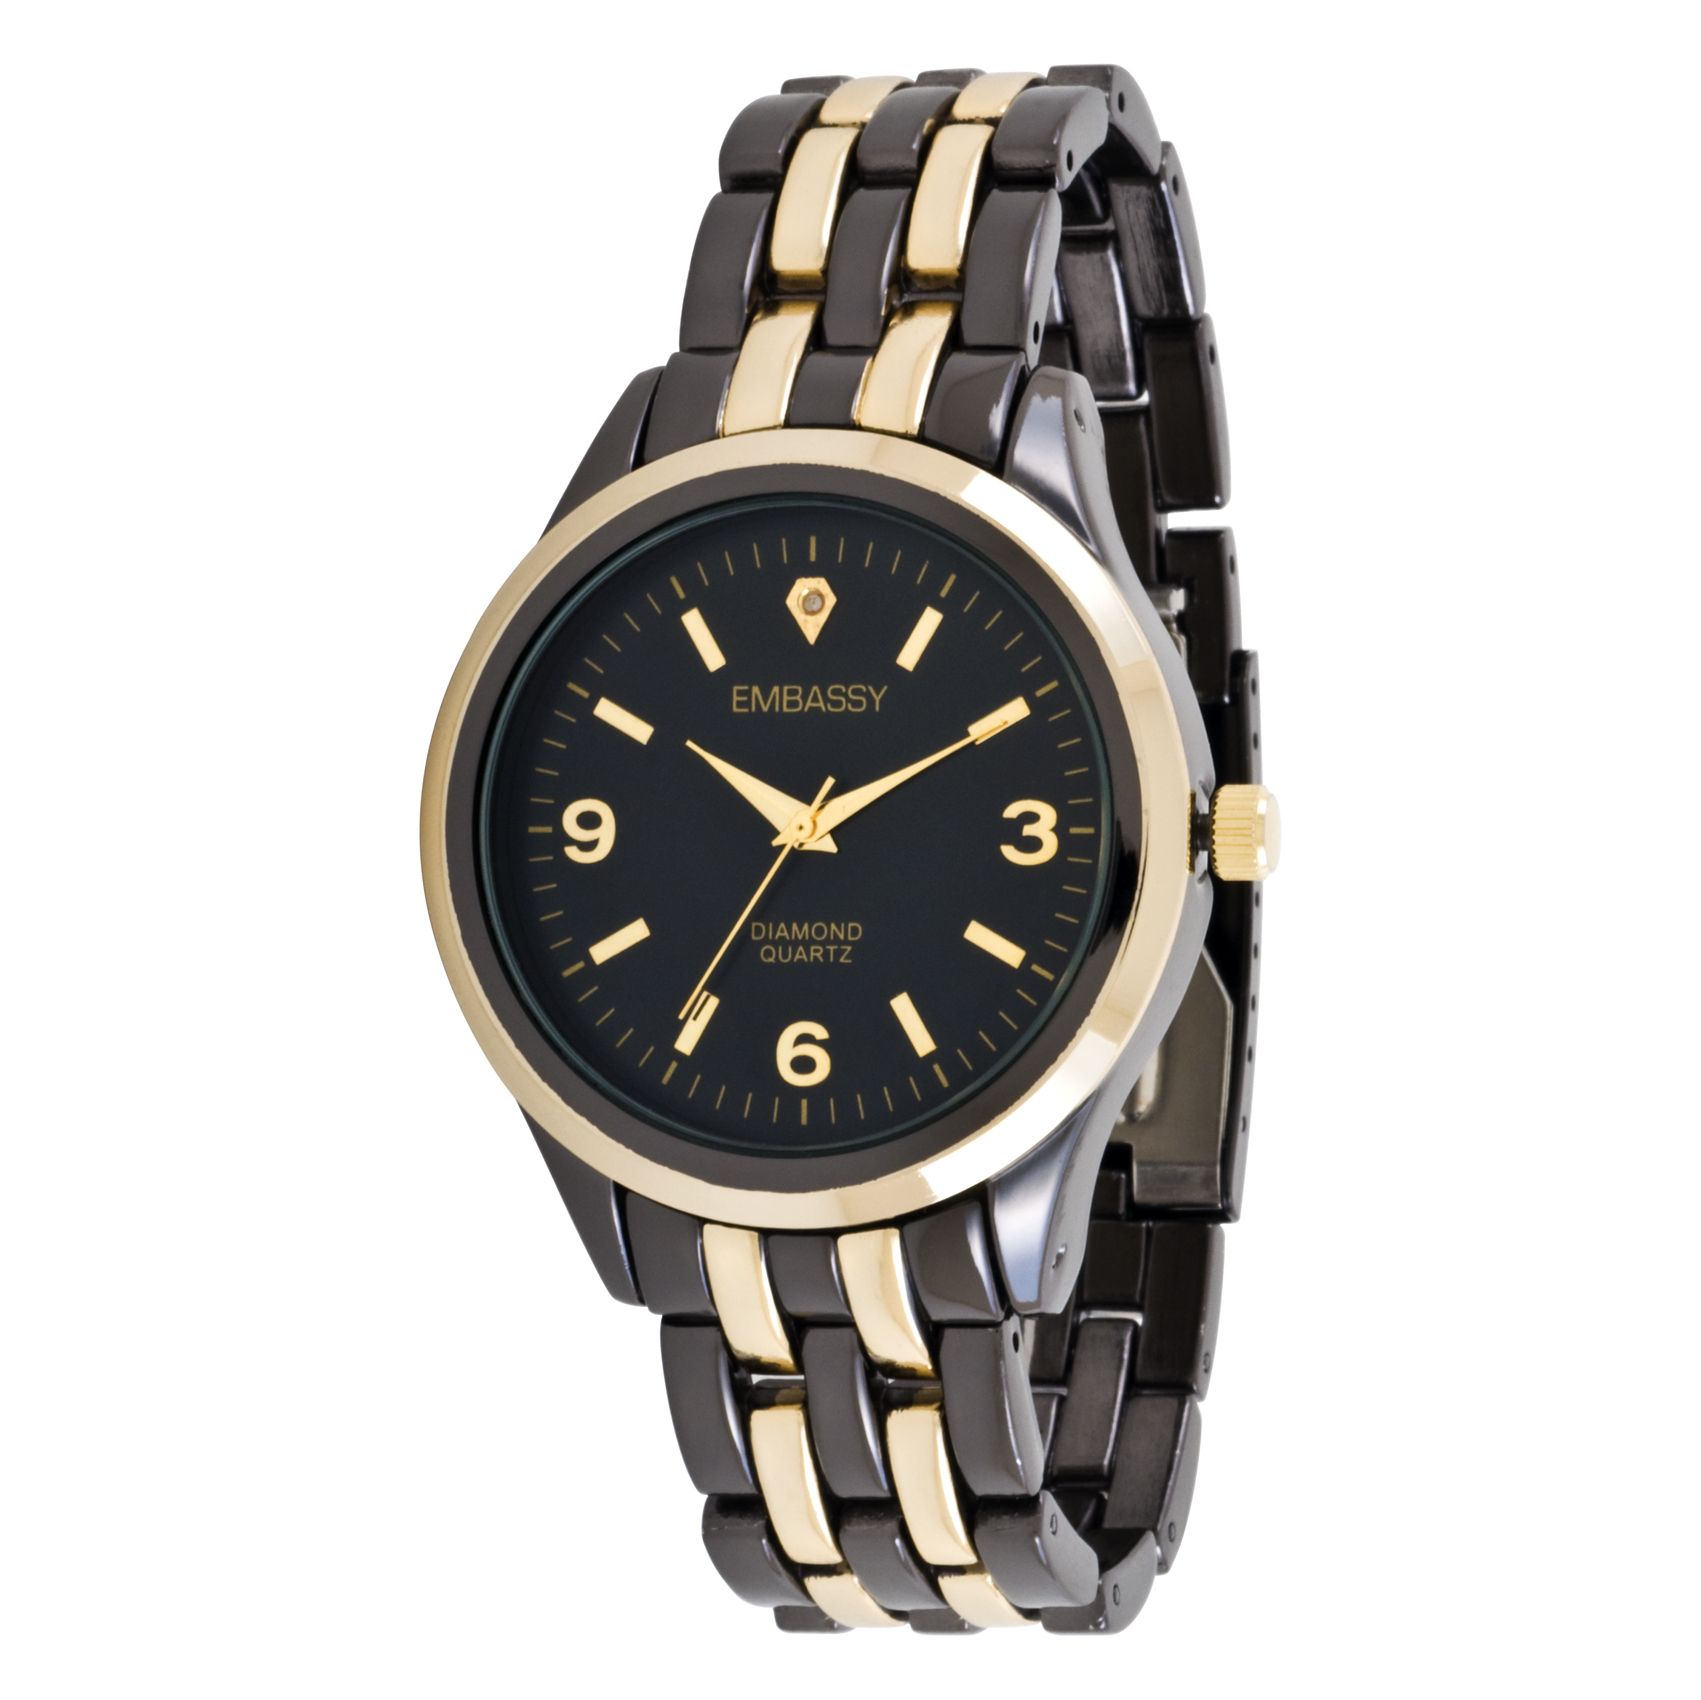 Men's Dress Watch w/Round Two-Tone Case, Black Crystal Accent Dial and TT Expansion Band